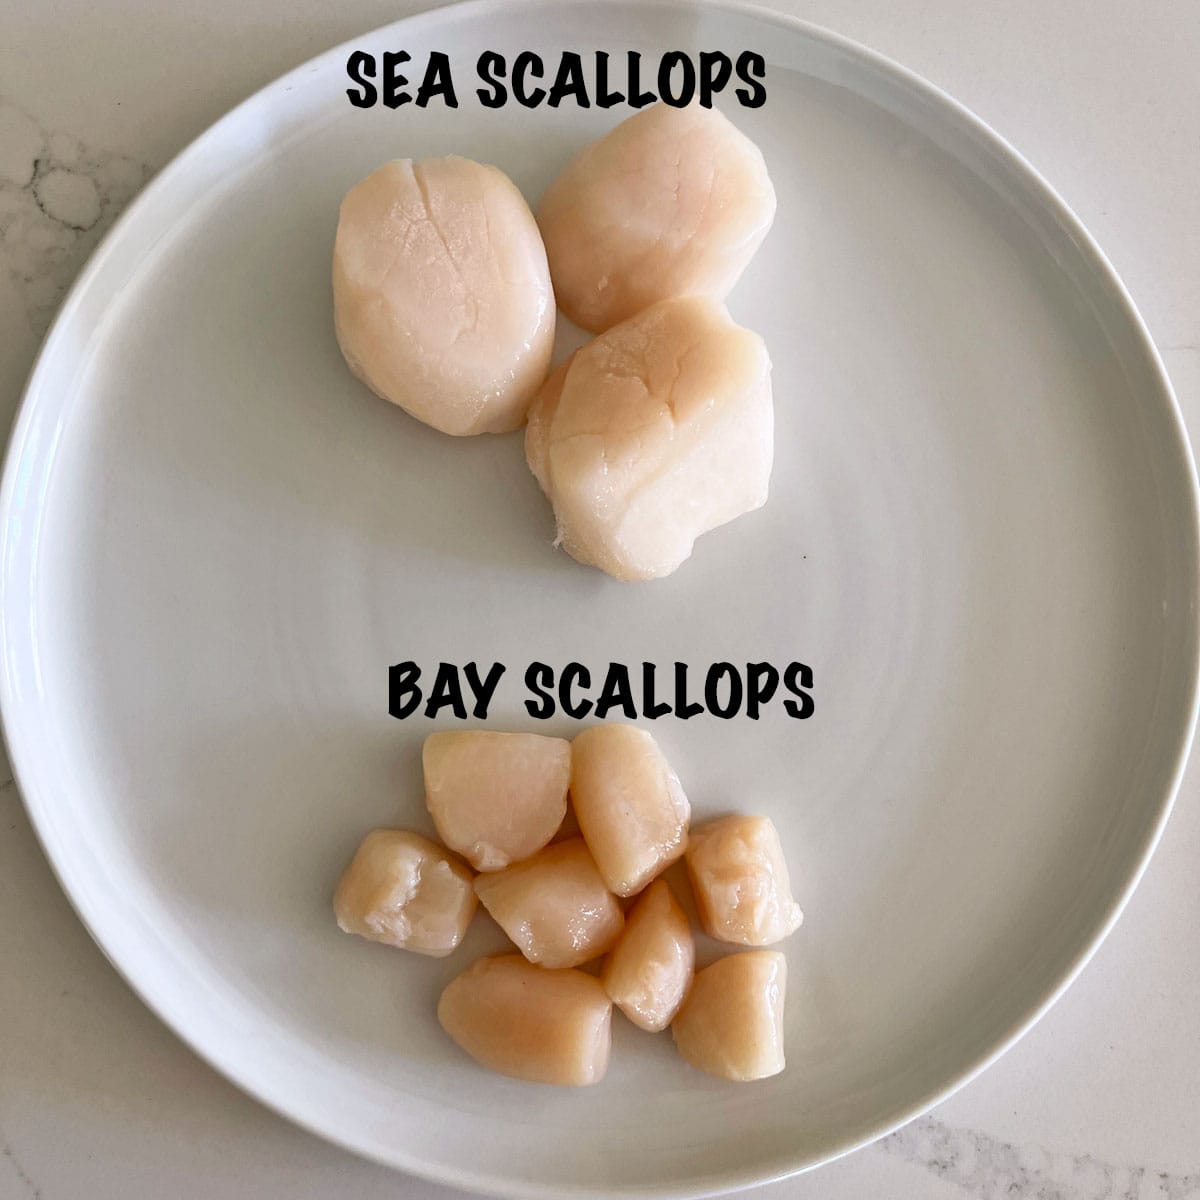 Sea scallops and bay scallops on a plate in a photo that shows the differences. 